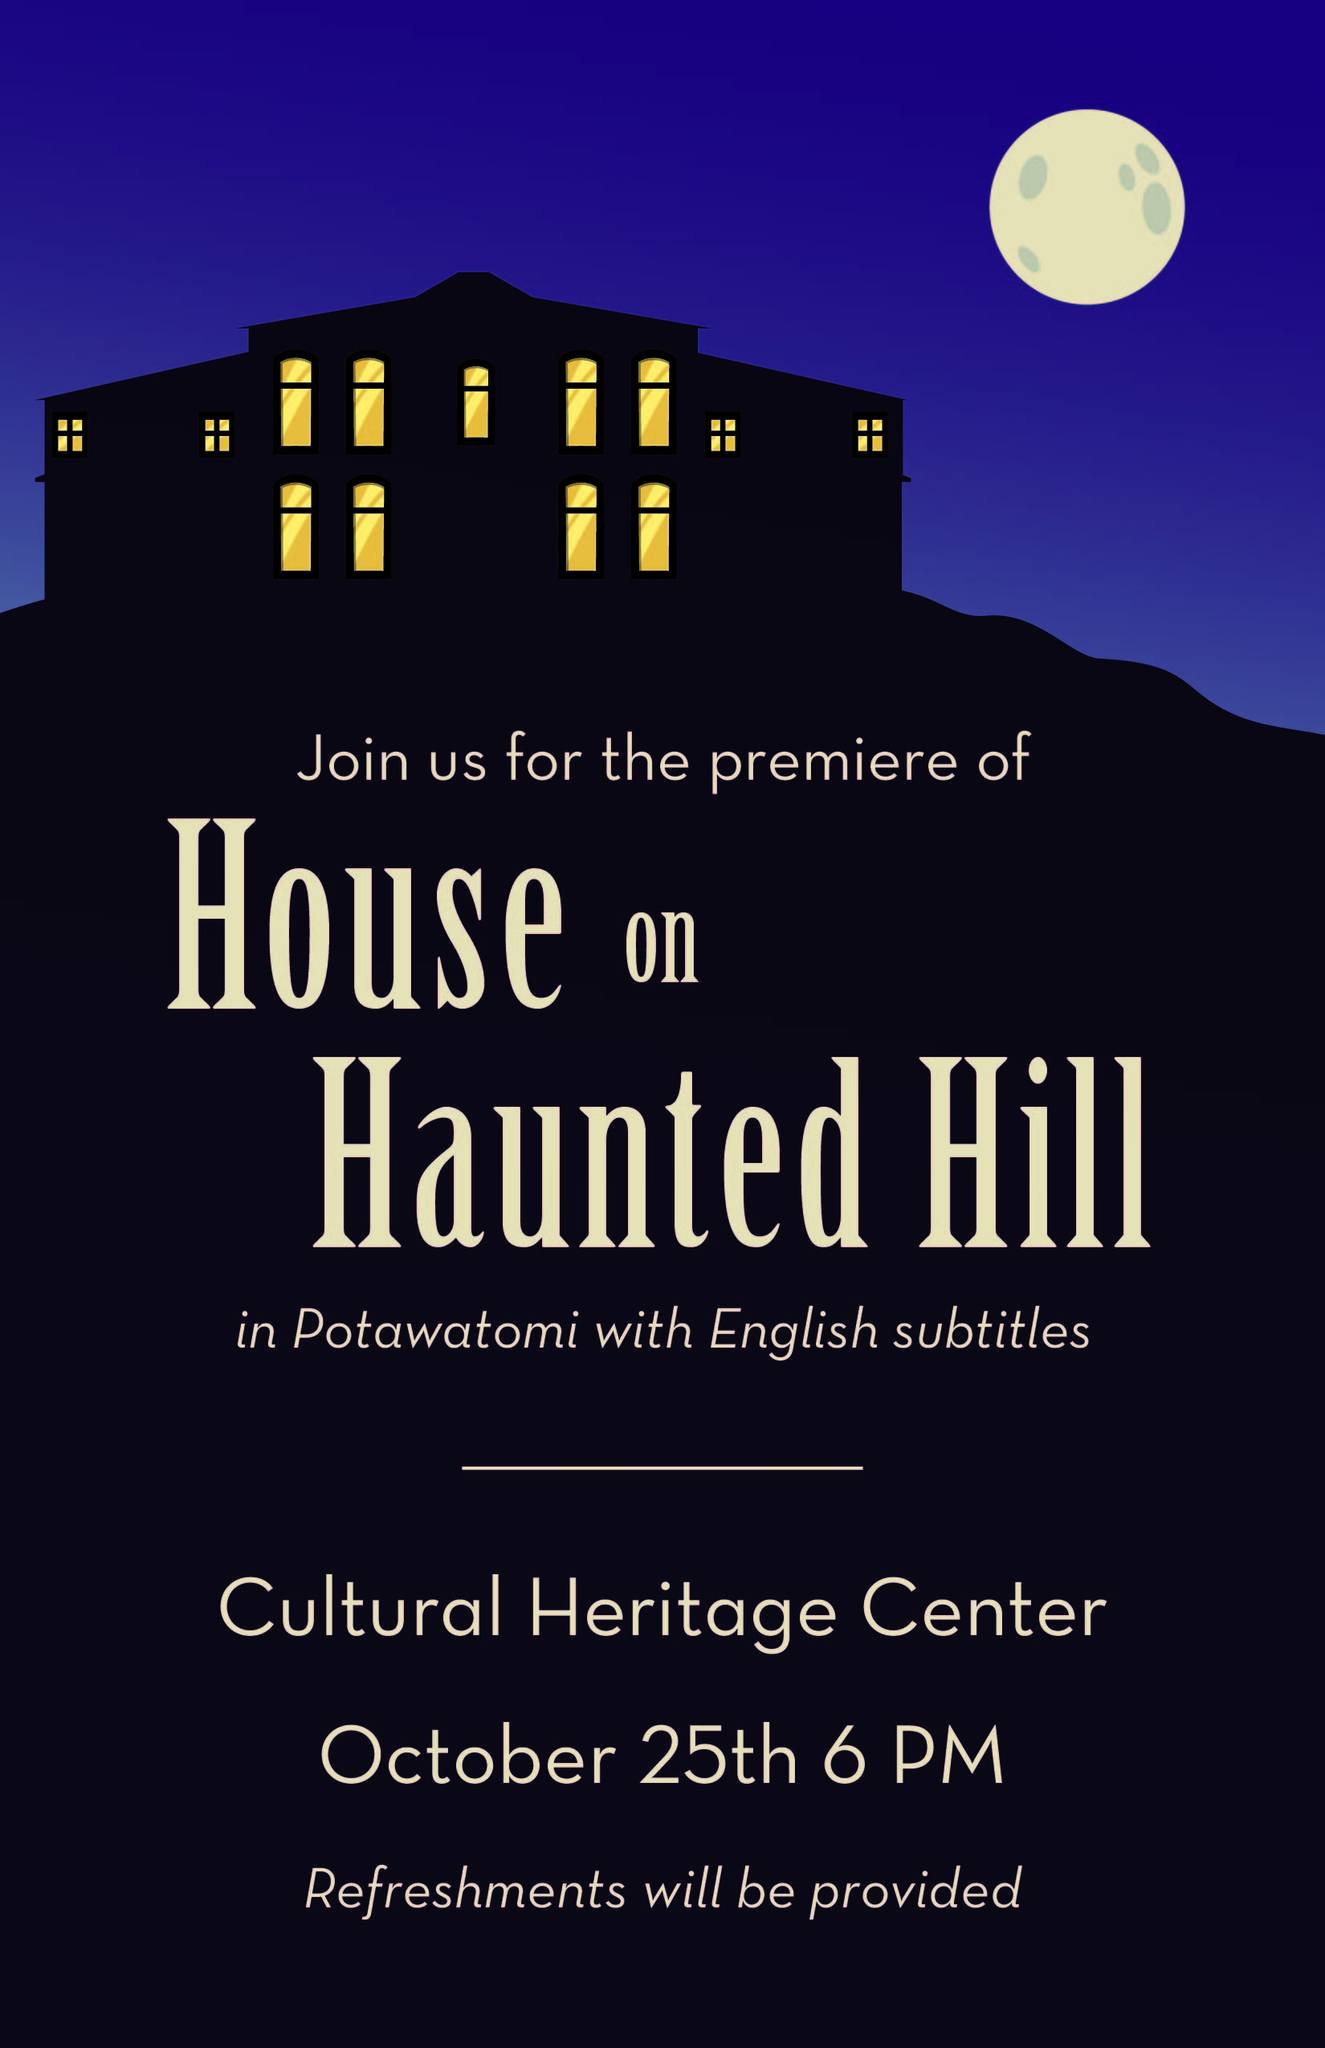 A silhouette of a house with yellow lighted windows on top of a dark hill. A full moon is in the night sky above it. Text invites guests to the Potawatomi premiere of House on Haunted Hill on October 25, 2023, at the Cultural Heritage Center.